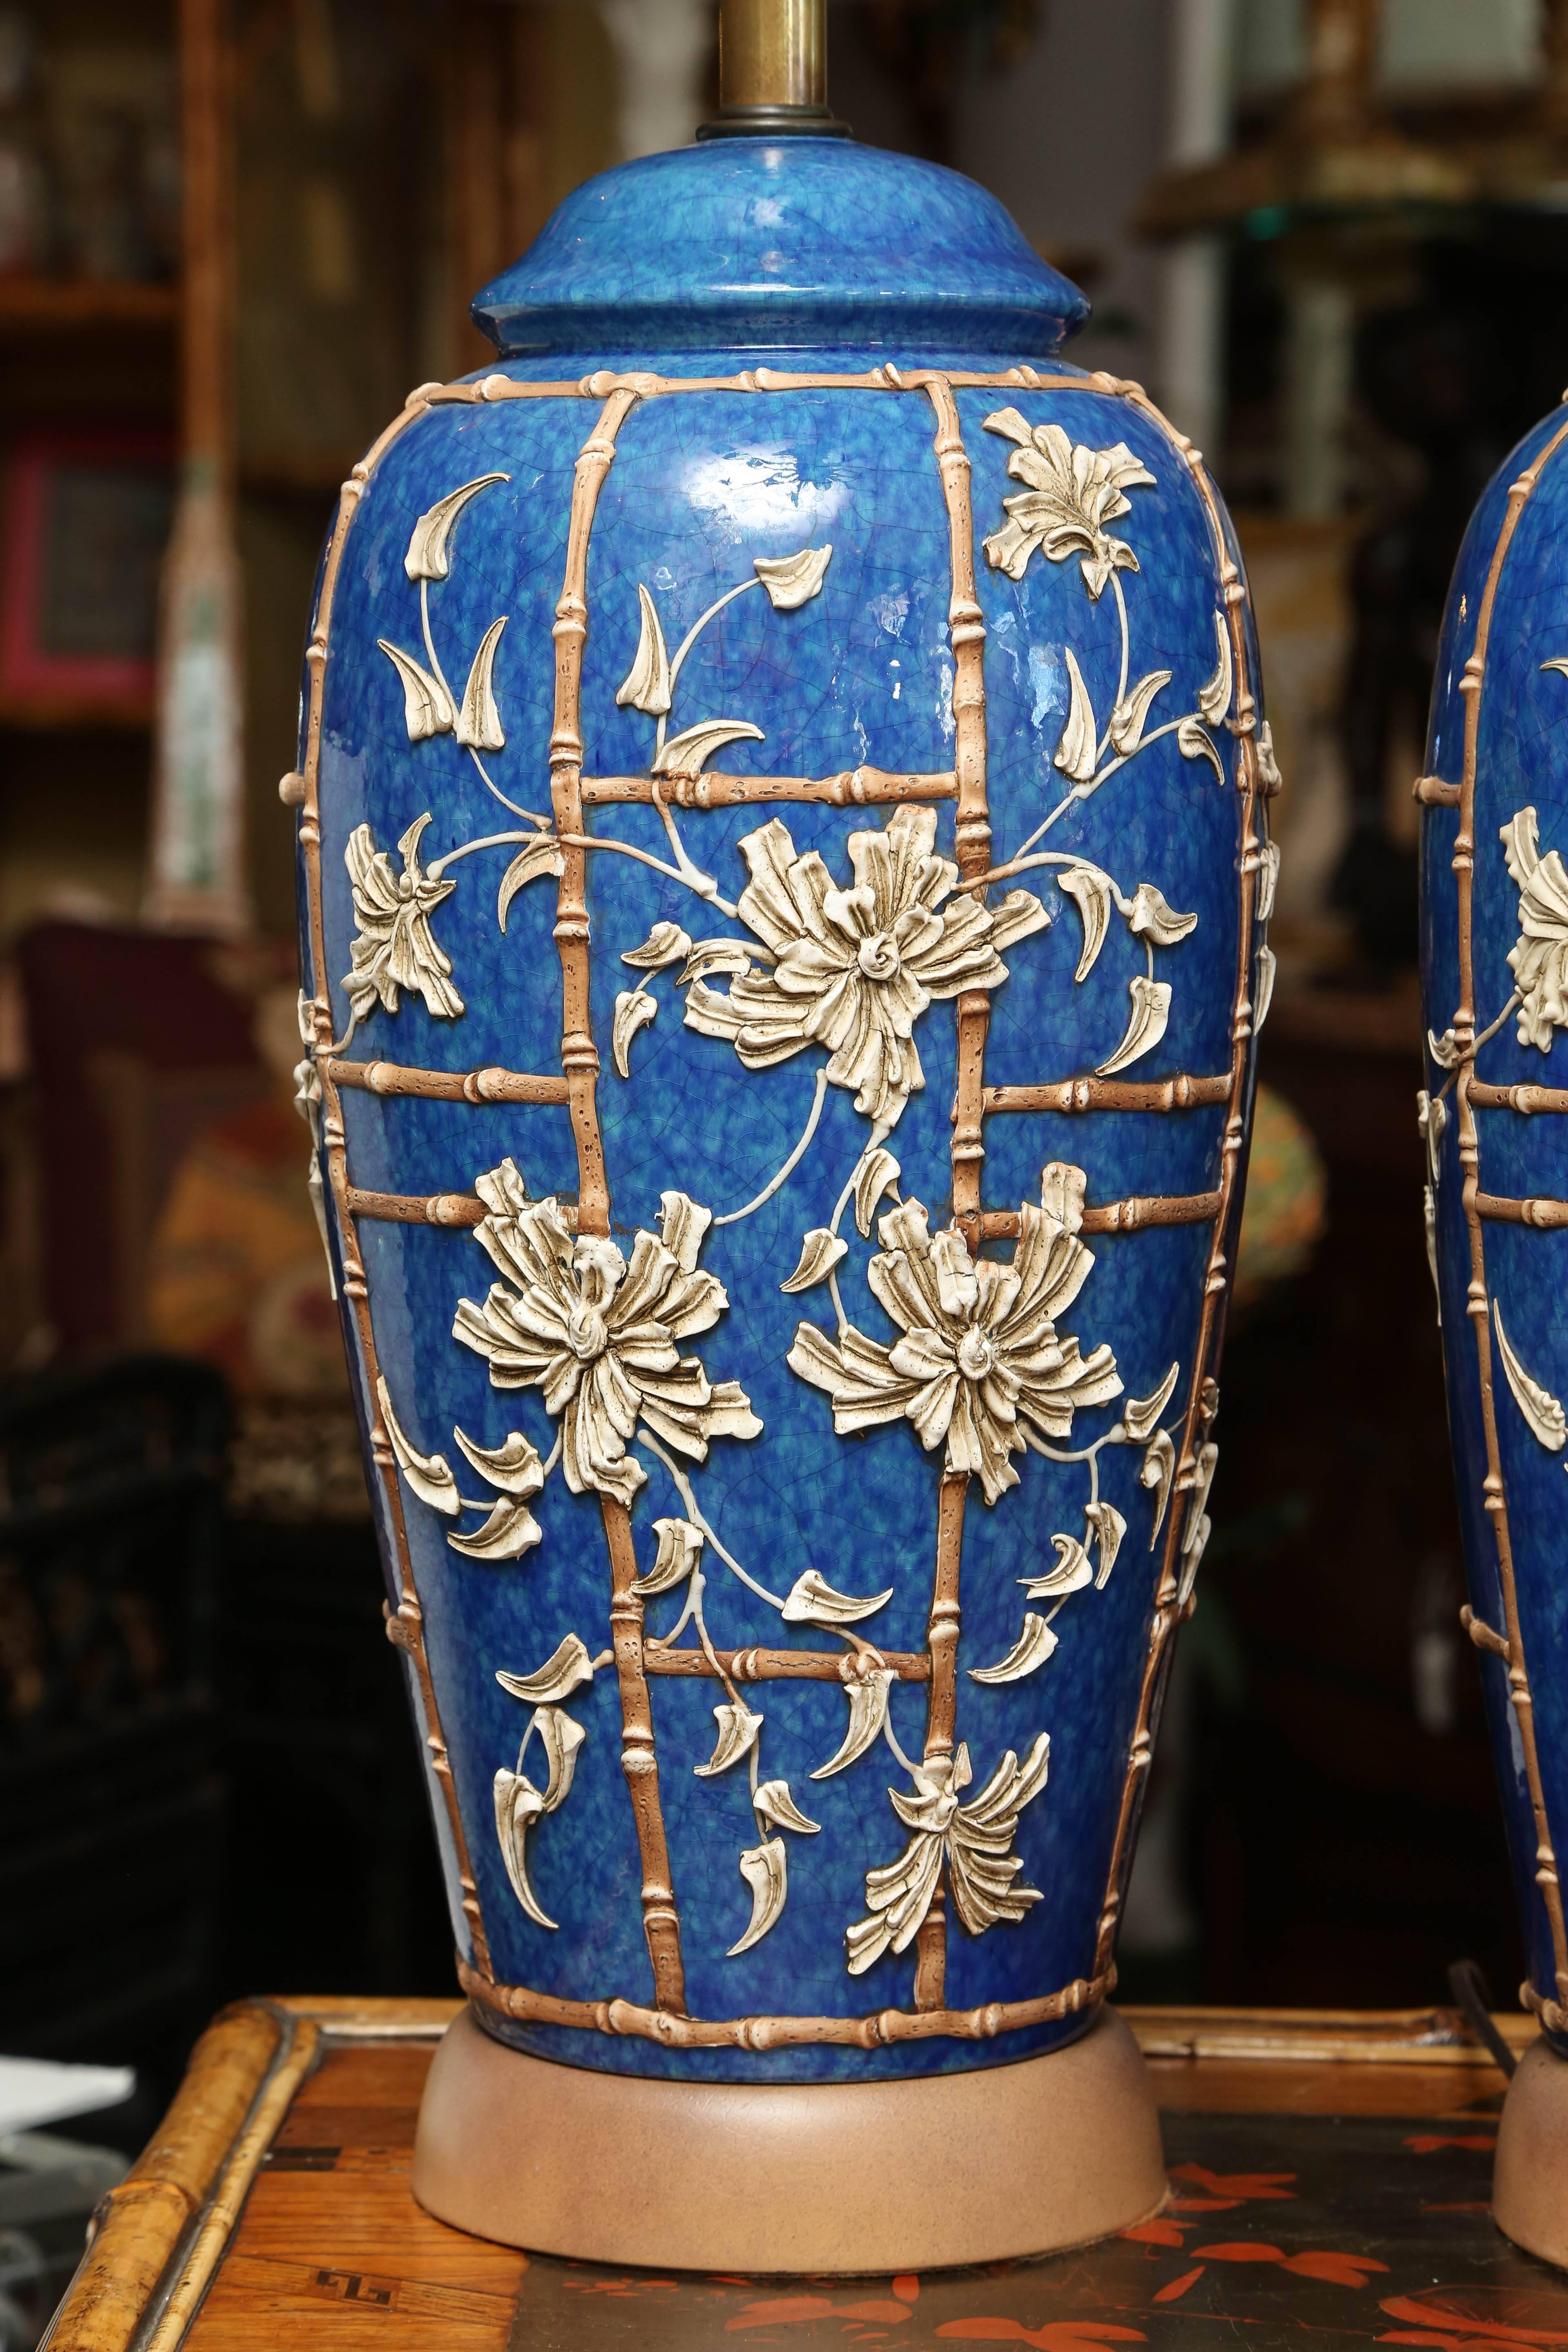 Early 20th century jars with raised floral.
A fine pair appointed with bamboo motif 